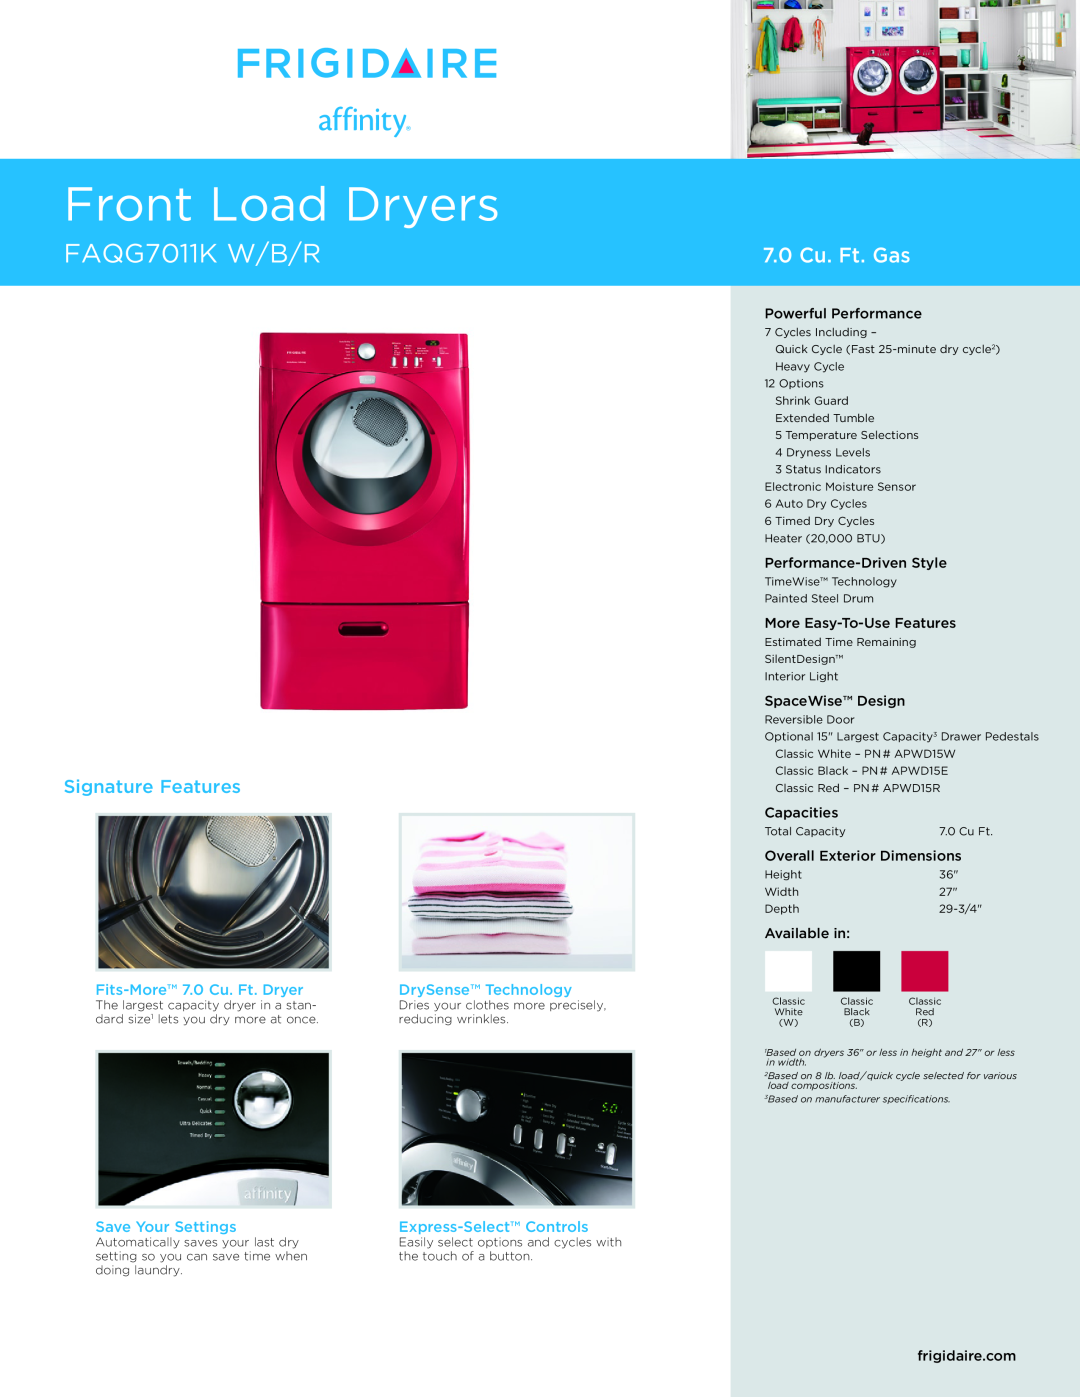 Frigidaire FAQG7011K W/B/R dimensions Fits-More 7.0 Cu. Ft. Dryer, DrySense Technology, Save Your Settings, Capacities 